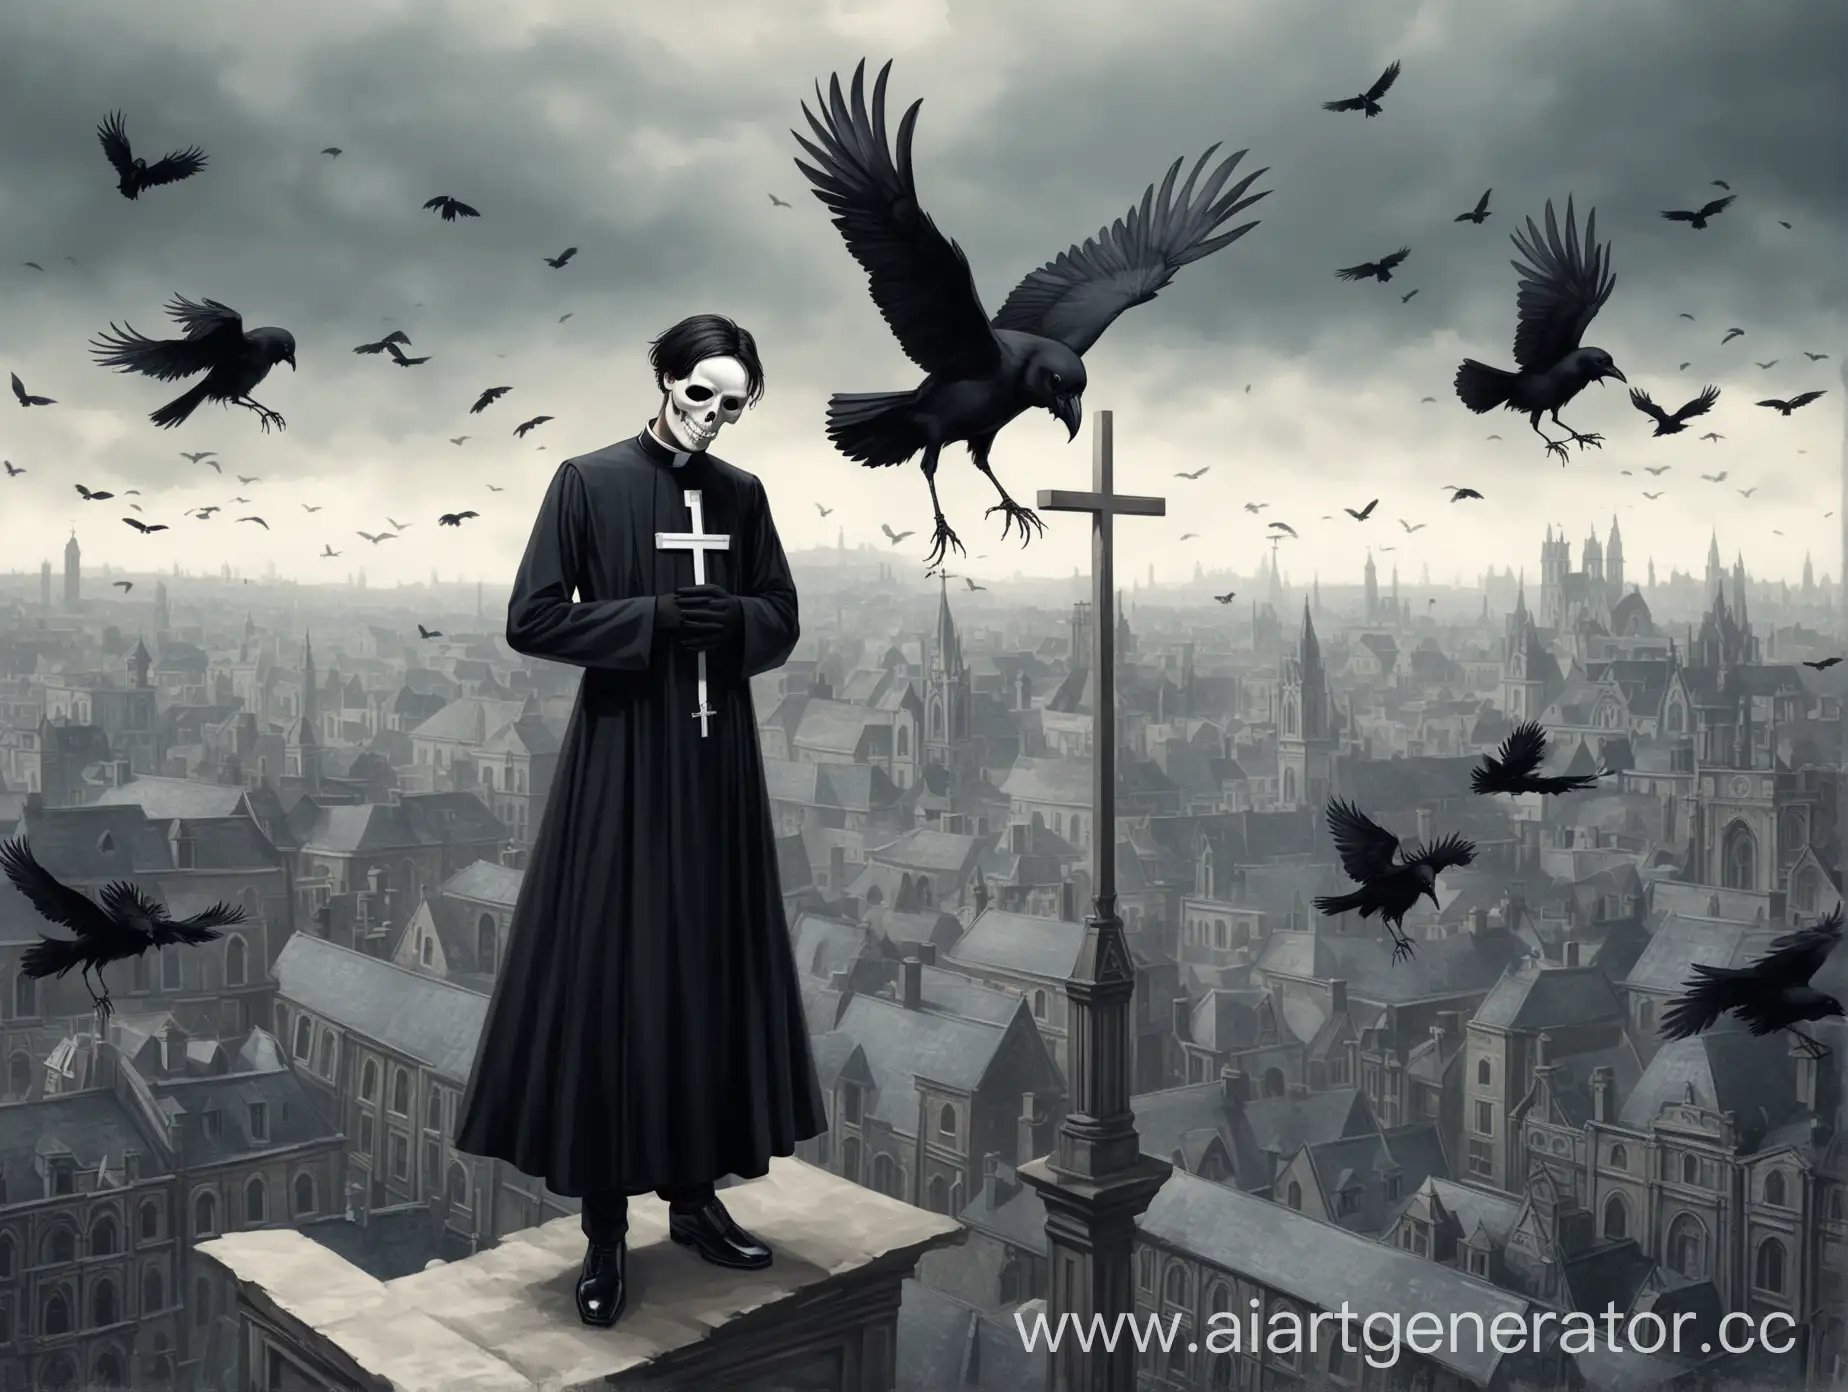 Man, skinny, dark, calm, catholic, priest, full height, black hair, white skull mask without jaw, black cassock, black shoes, black gloves, big cross on bossom, looks down on you, the judgmental pose, hair fluttering in the wind, cassock fluttering in the wind, victorian city is behind, crows are flying, grey sky